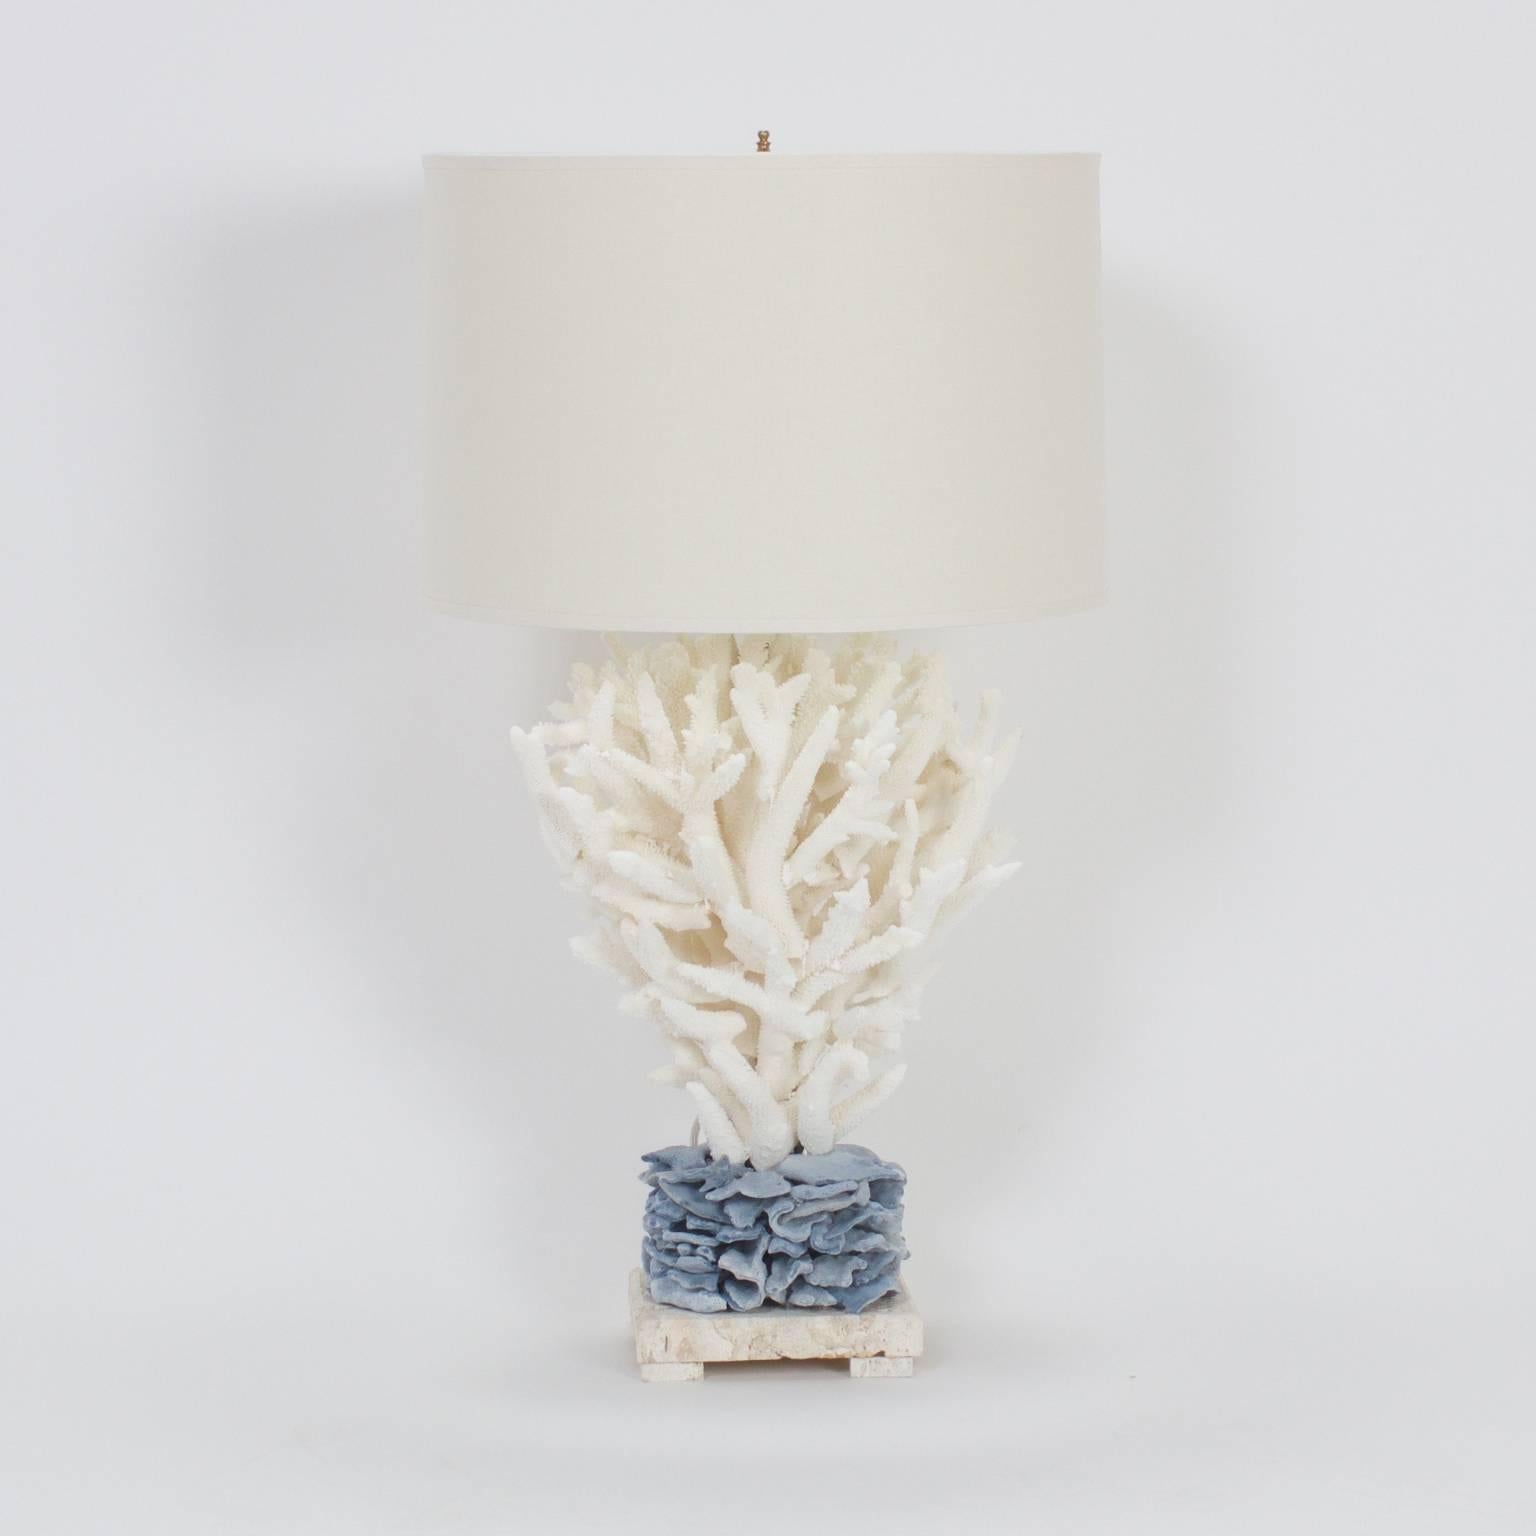 Inspired pair of blue and white Staghorn coral table lamps custom designed and made by F. S. Henemader. Crossing the line between art and function these one of a kind lamps have plenty of decorative applications. 

This piece cannot be shipped out